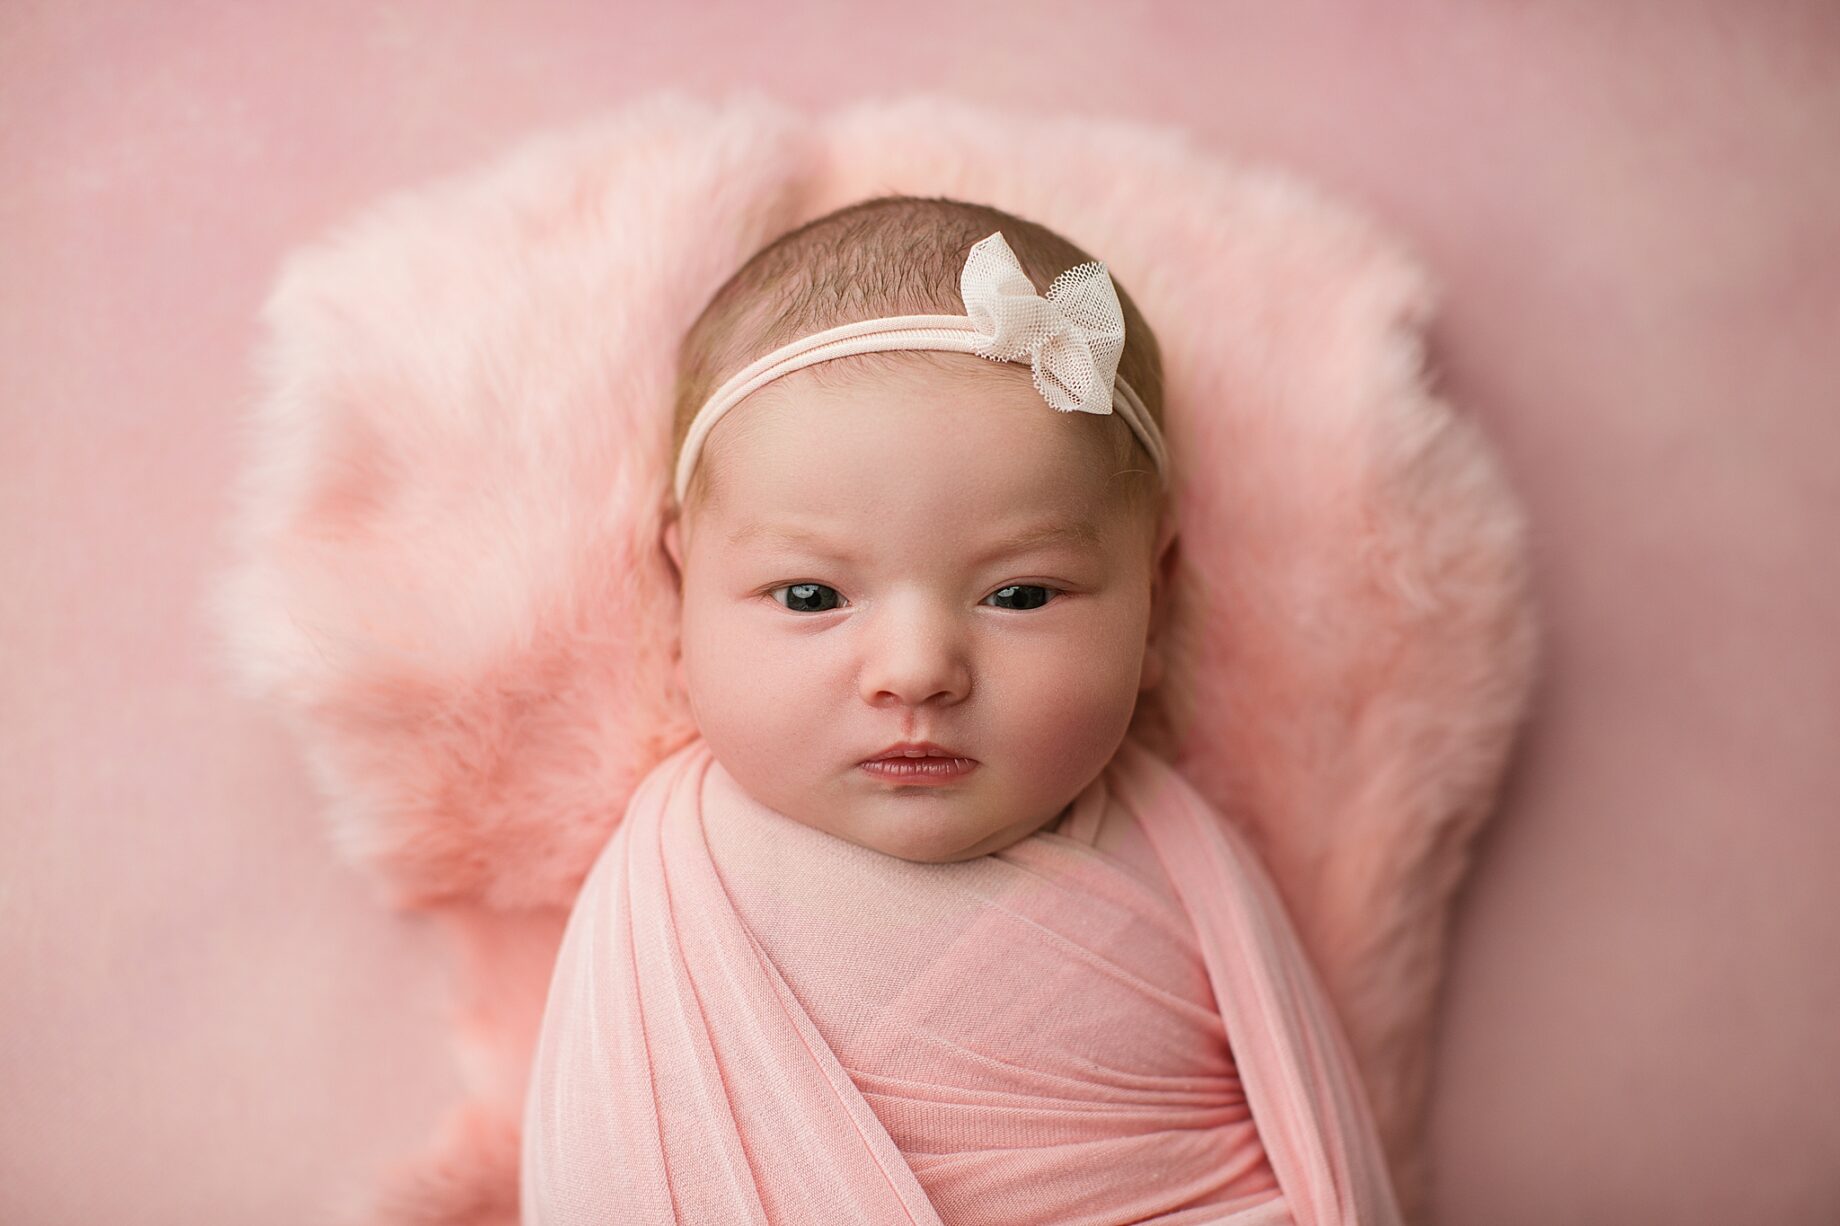 Perryville newborn photographer, southeast Missouri newborn, Cape Girardeau newborn photographer, awake baby, pink backdrop, photography studio newborn, baby girl looking at camera